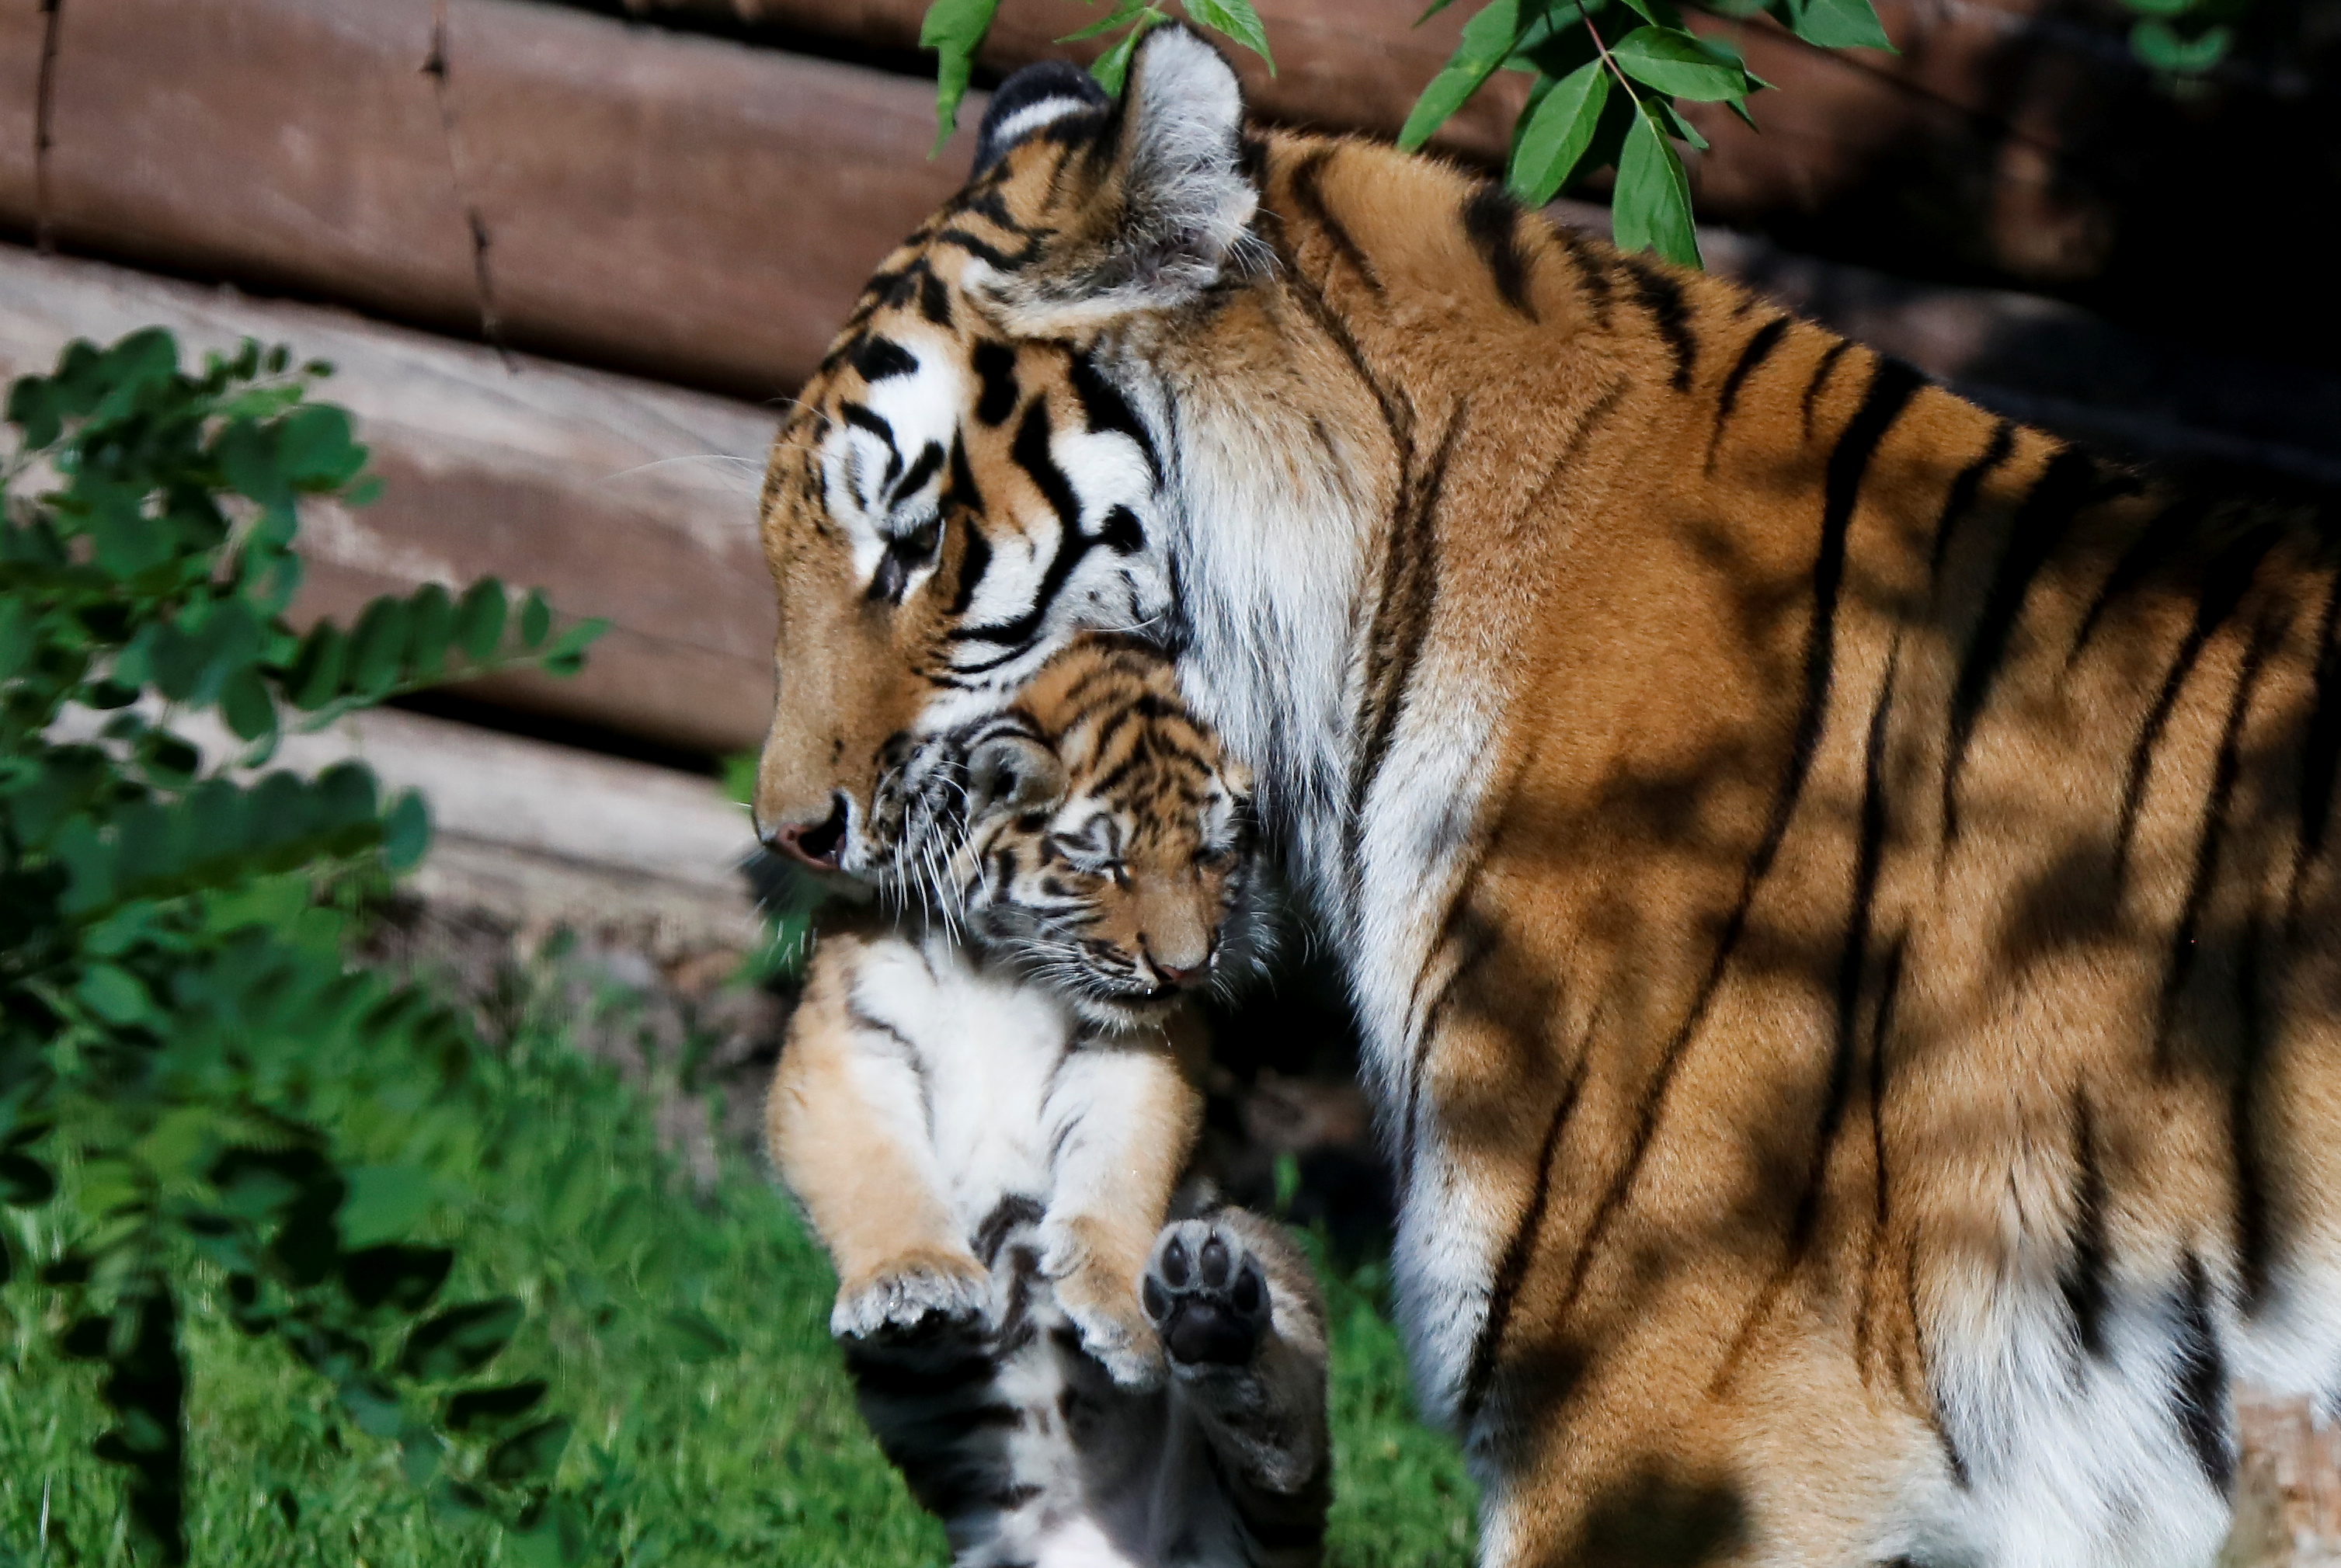 Excited' Polish zoo unveils rare Siberian tiger cubs